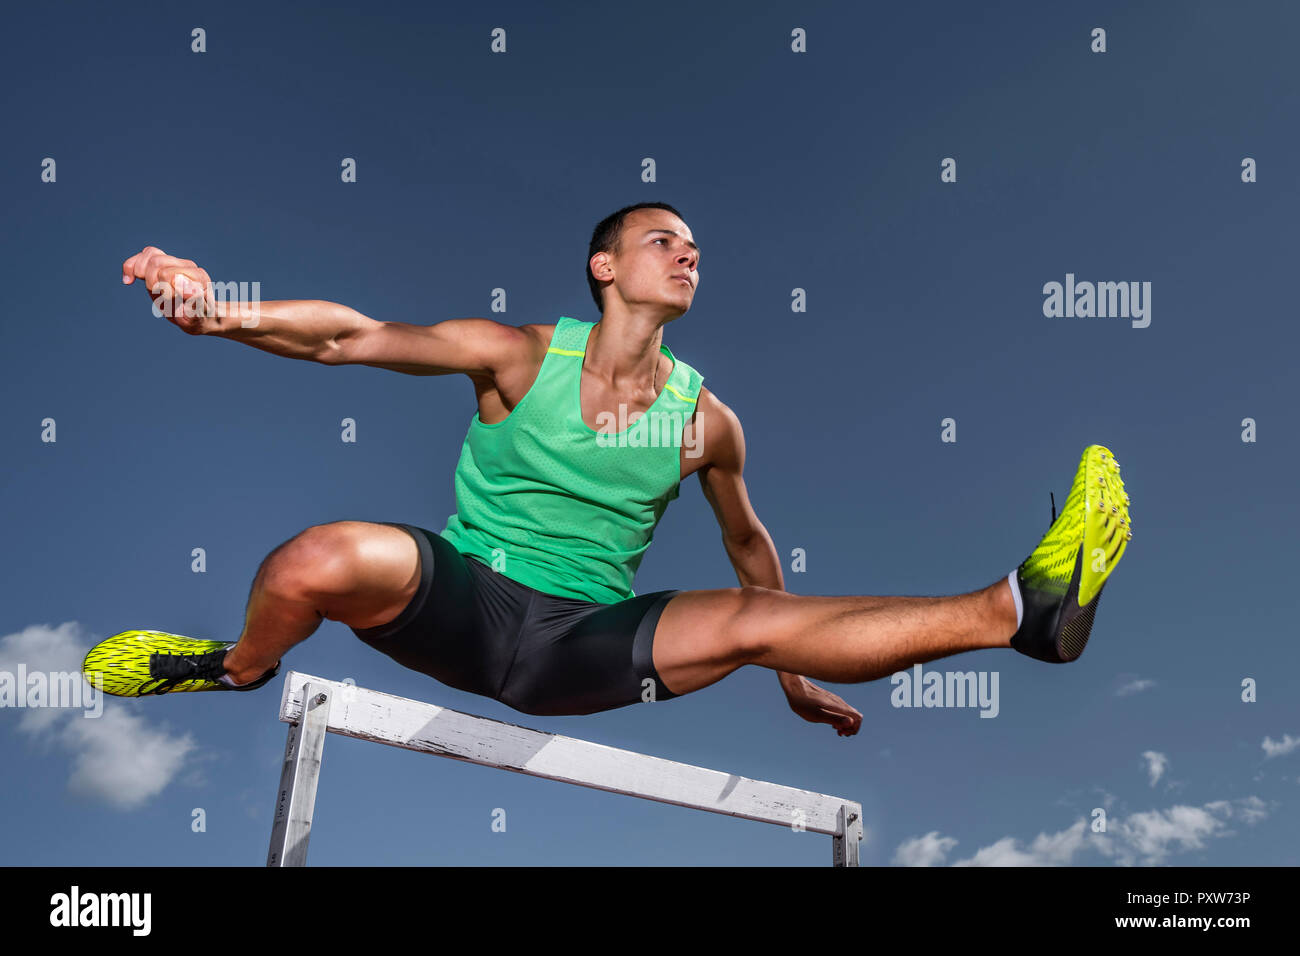 Young runner crossing hurdle Stock Photo